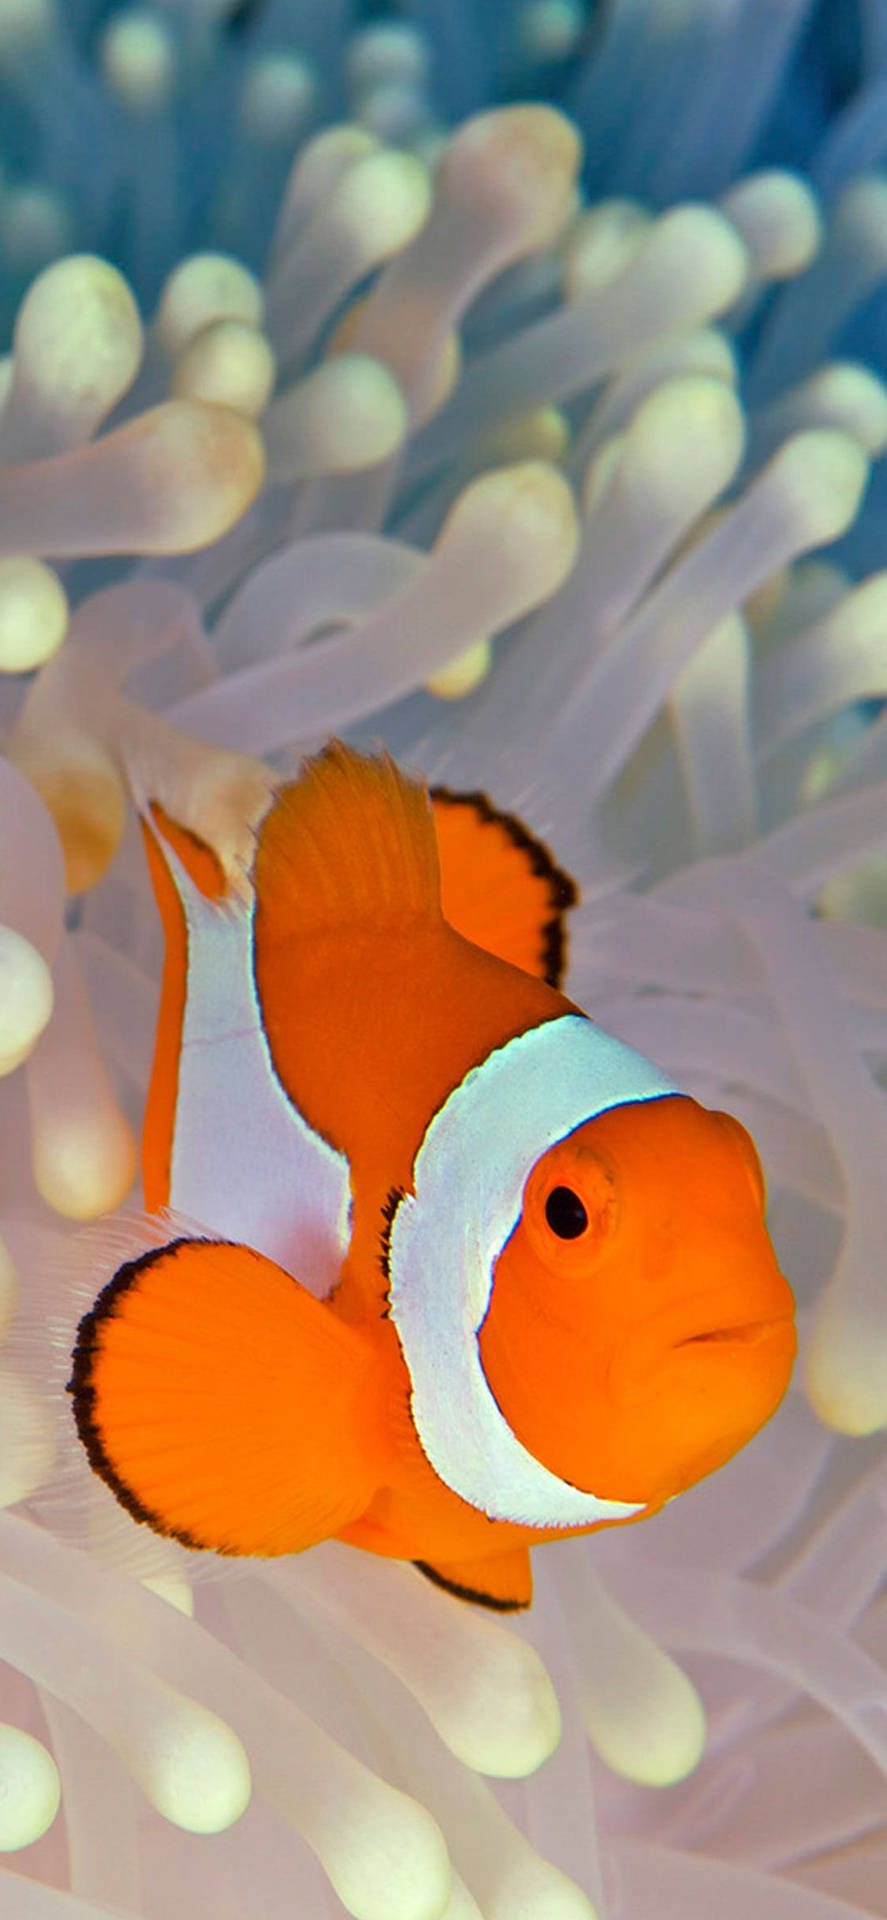 Clownfish In An Anemone And The Dark Of The Ocean Background Clownfish And  Syrite Sea Anemone Symbiosis Hd Photography Photo Anemone Fish Background  Image And Wallpaper for Free Download